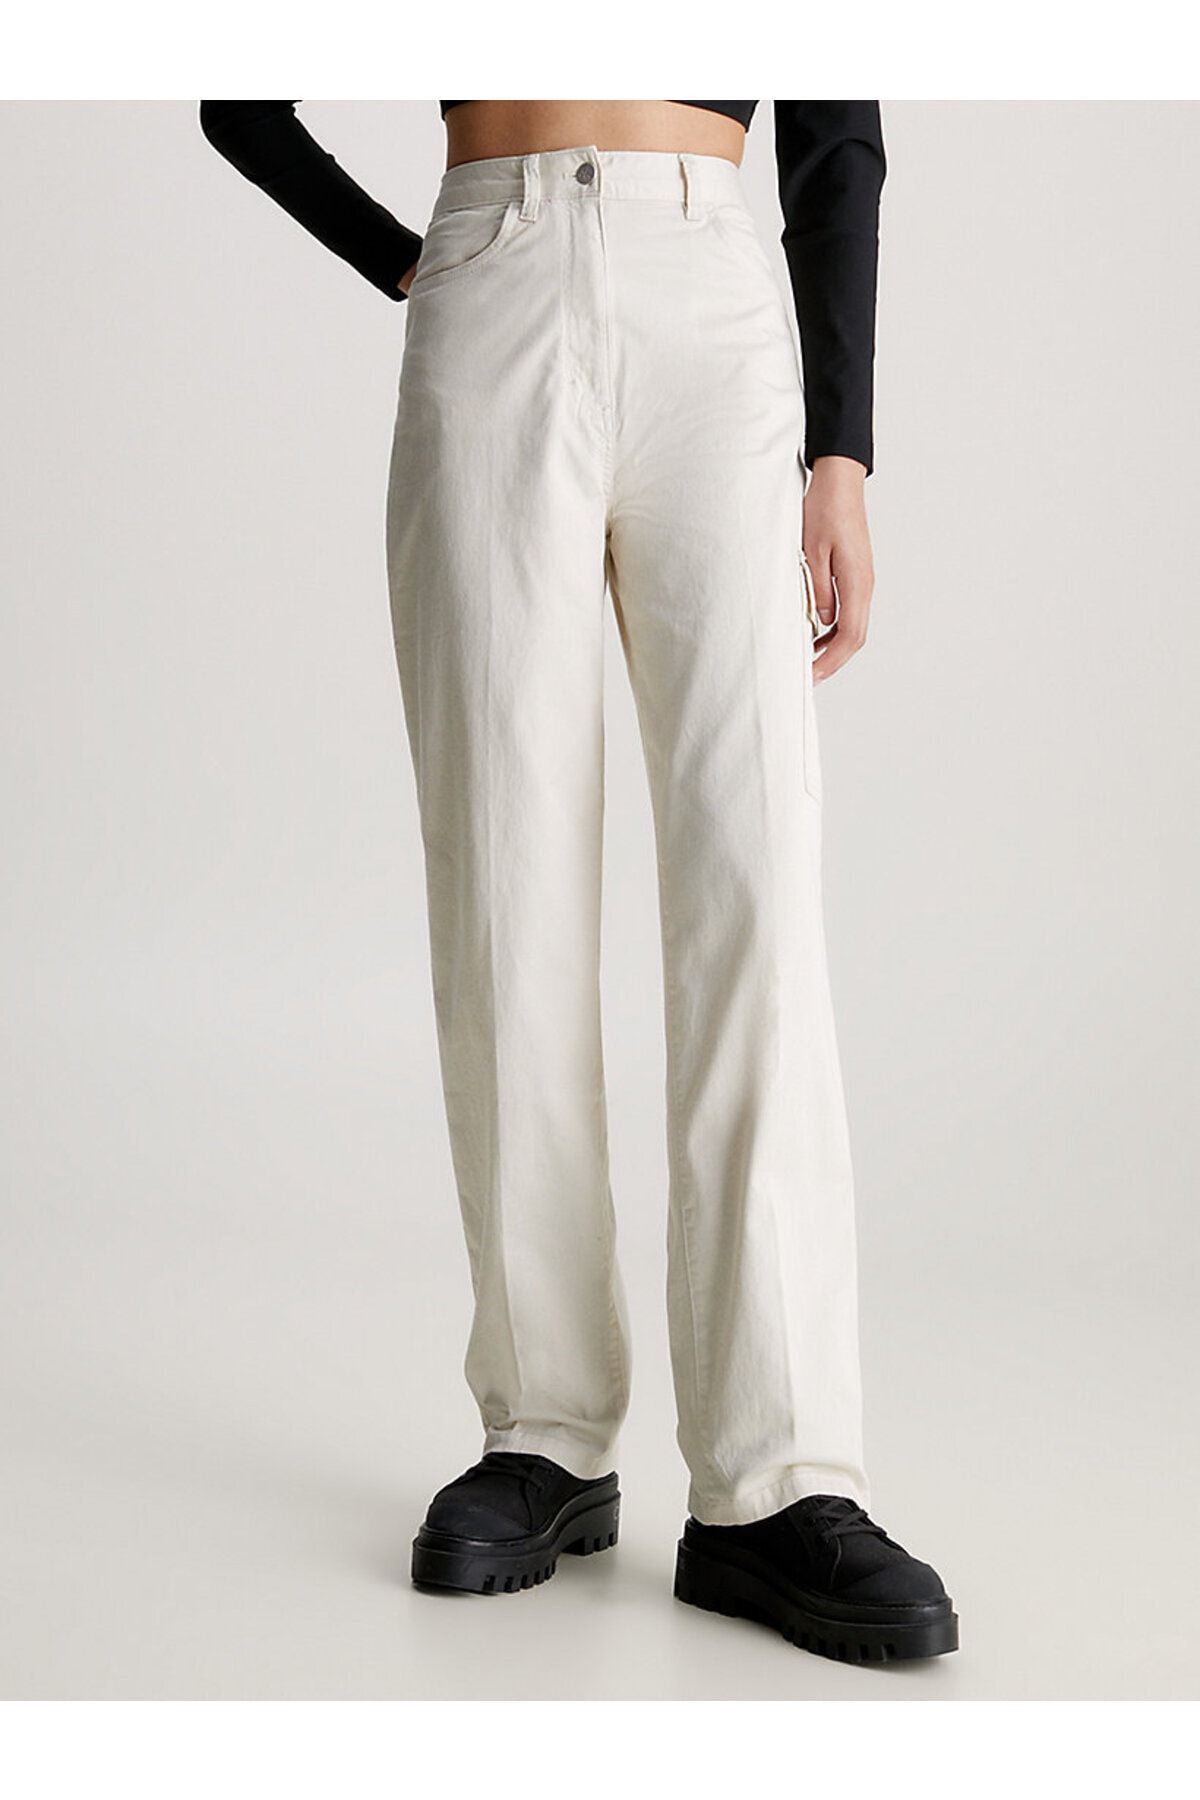 Calvin Klein pants / trousers. Colored white. Size 58 / XL. Straight F –  EcoGents